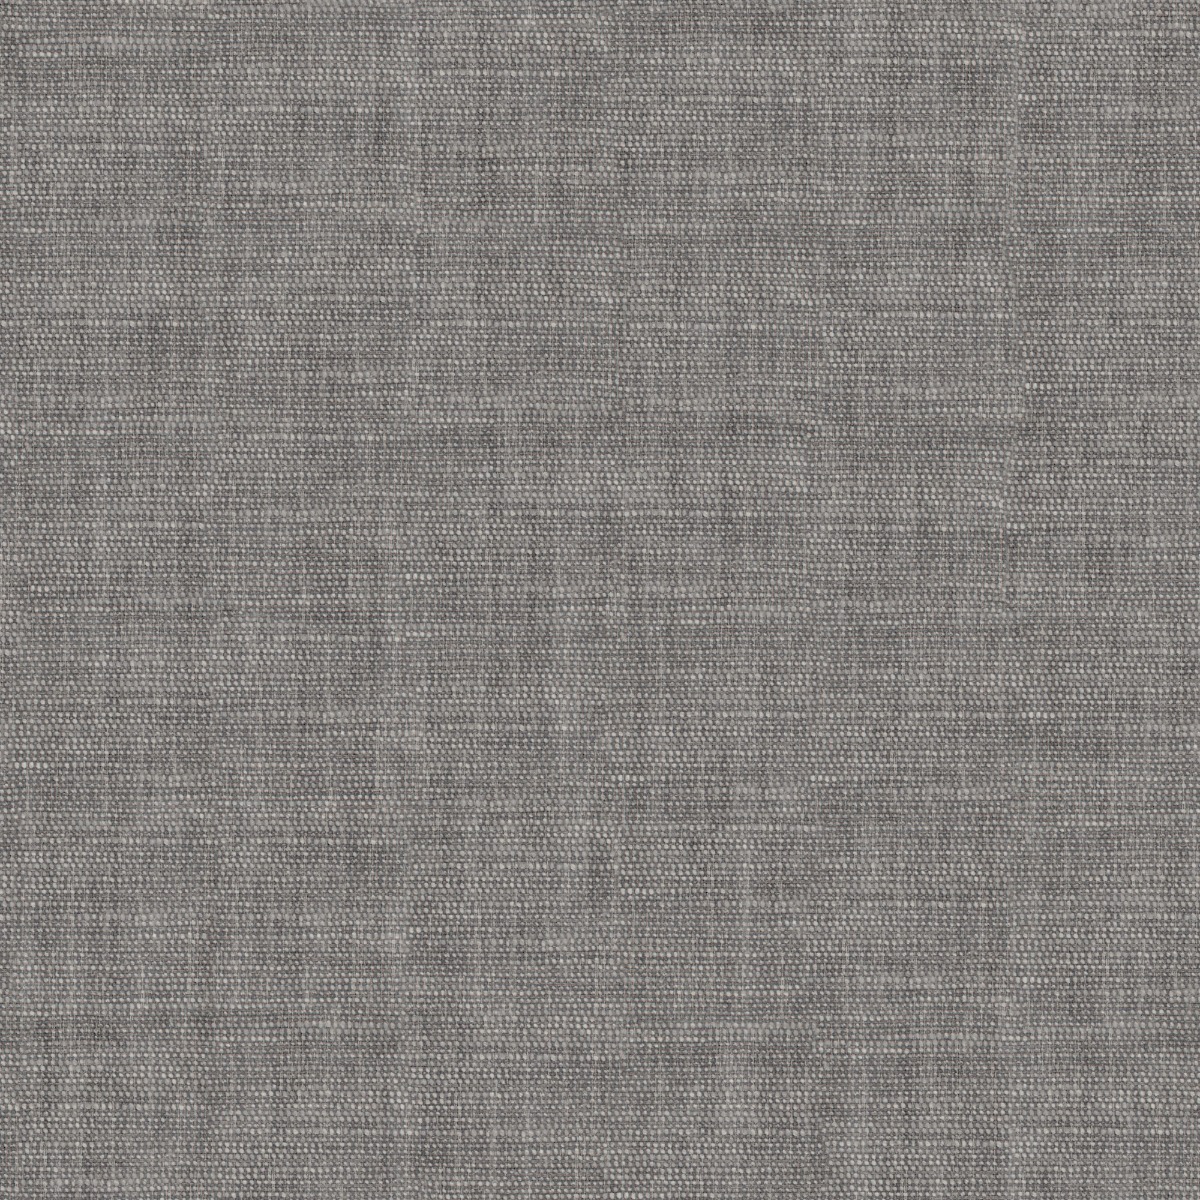 A seamless fabric texture with plain grey flat units arranged in a None pattern